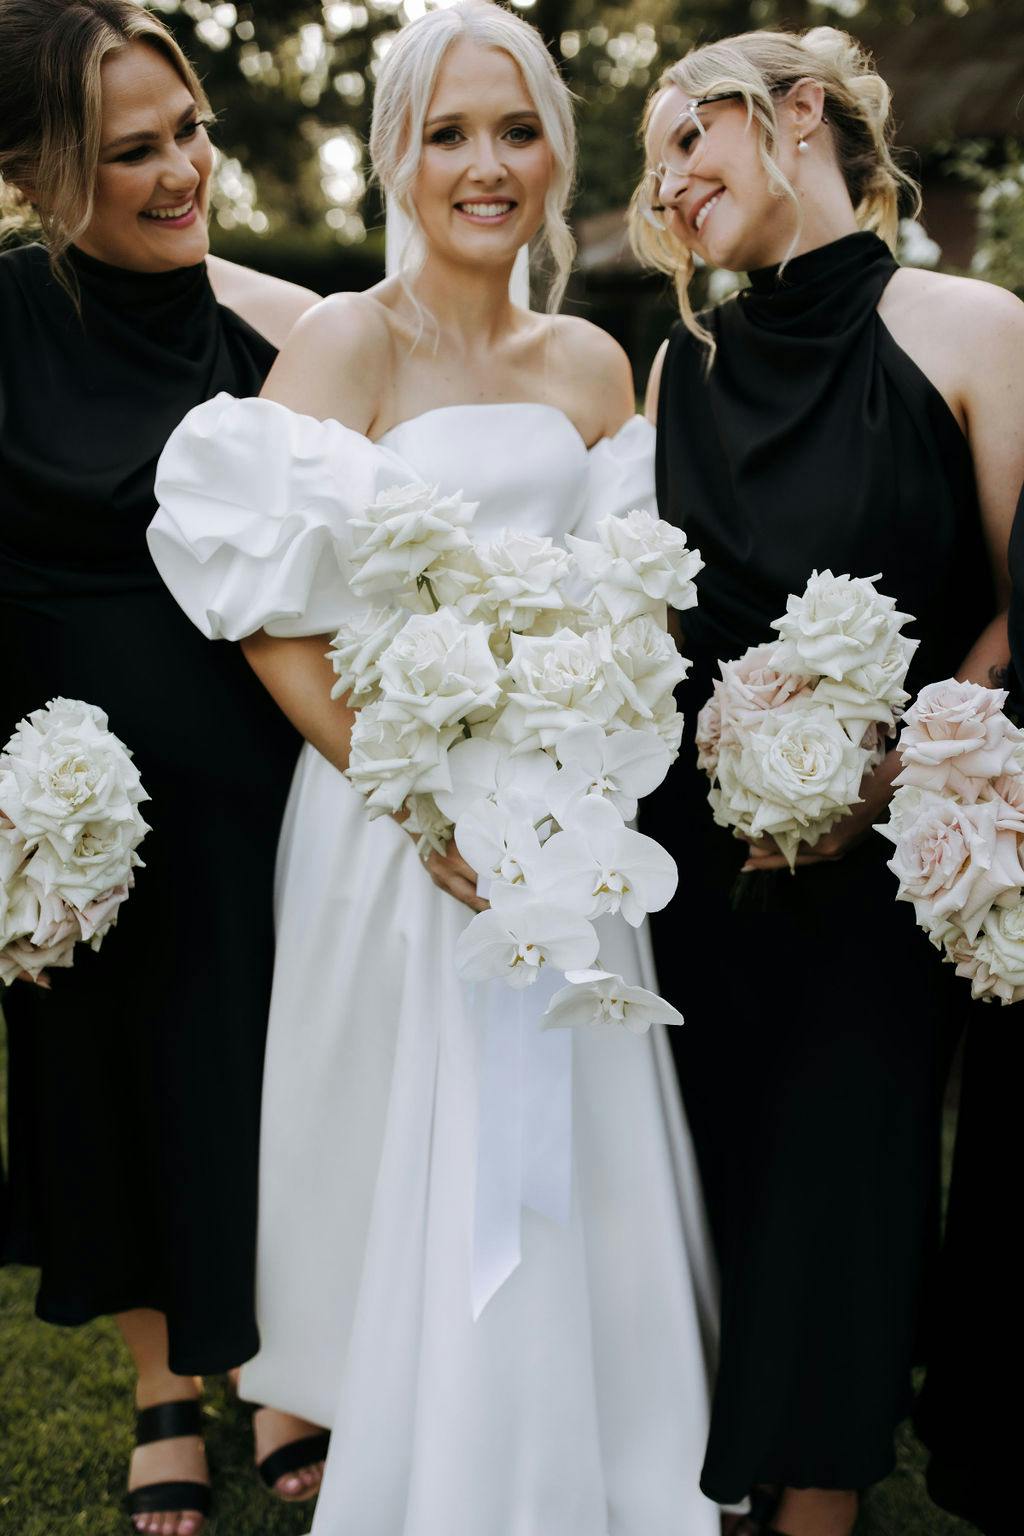 A bride, dressed in a white off-the-shoulder gown with puffed sleeves, holds a cascading bouquet of white flowers. She is flanked by two bridesmaids in black dresses, each holding bouquets of light pink roses. The group is outdoors with greenery in the background.